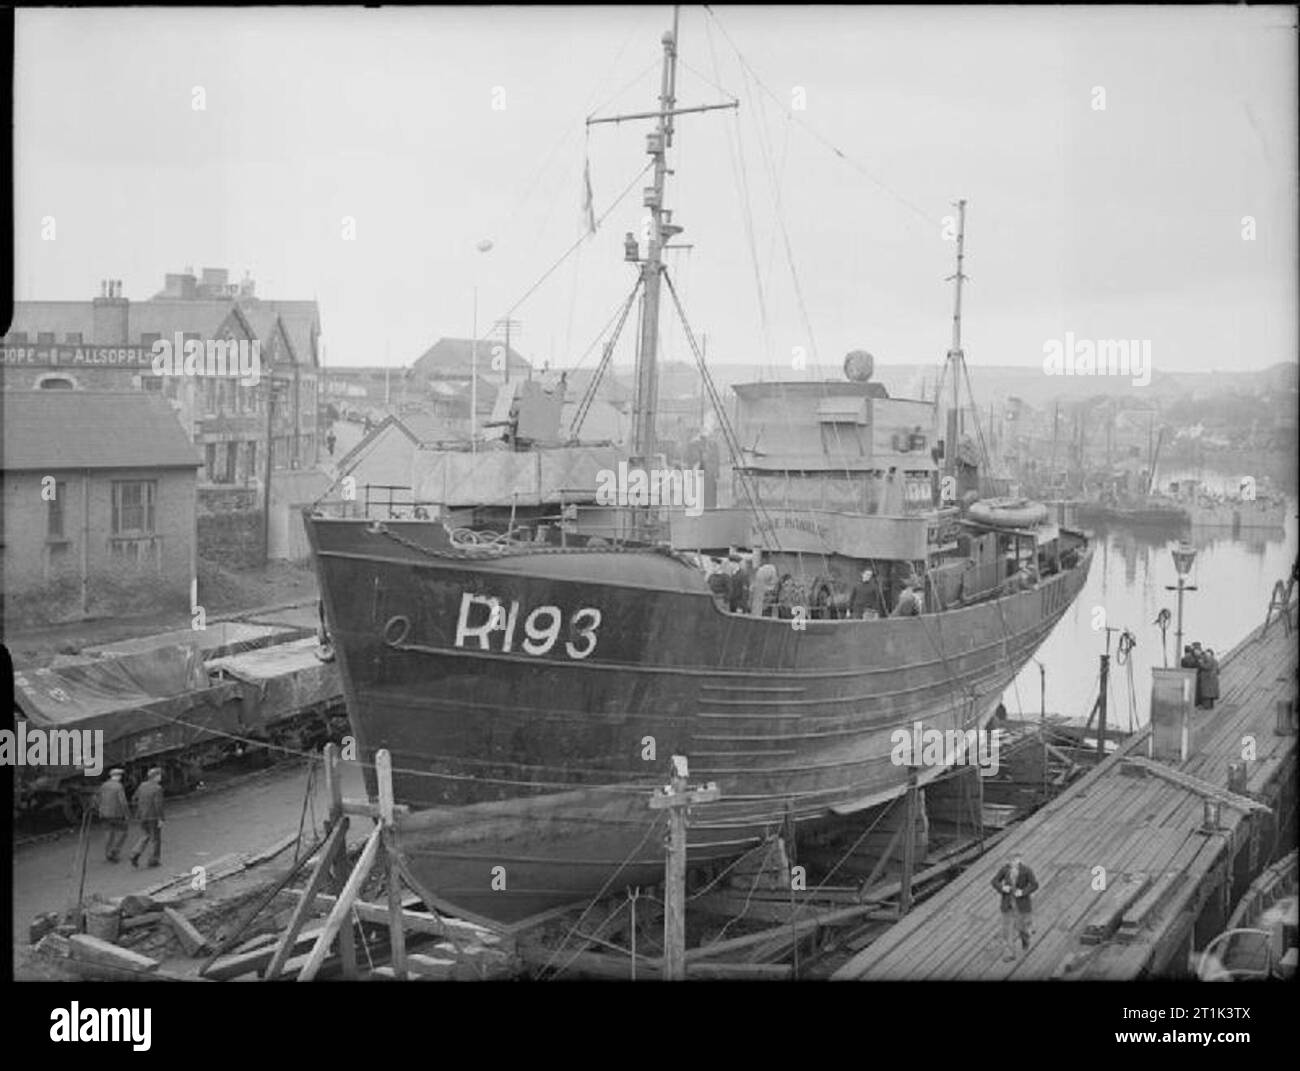 The Royal Navy during the Second World War HMT ANDRE MONIQUE, a Belgian trawler in commision as a HM Patrol Boats in dry dock. This was one of three Belgian fishing trawlers that escaped from the Belgian coast and now help to guard the British coast around Milford Haven and Fishguard. Comments: The boat was stationed at Milford Haven. The ship serverd as an Auxiliary Patrol Vessel in Western Approaches Command (Milford Haven), which was commanded by Rear Admiral P E Phillips DSO Rtd. The photo shows the landing stage, slipway and railway, as seen from Victoria Bridge, Milford Haven. See the 19 Stock Photo